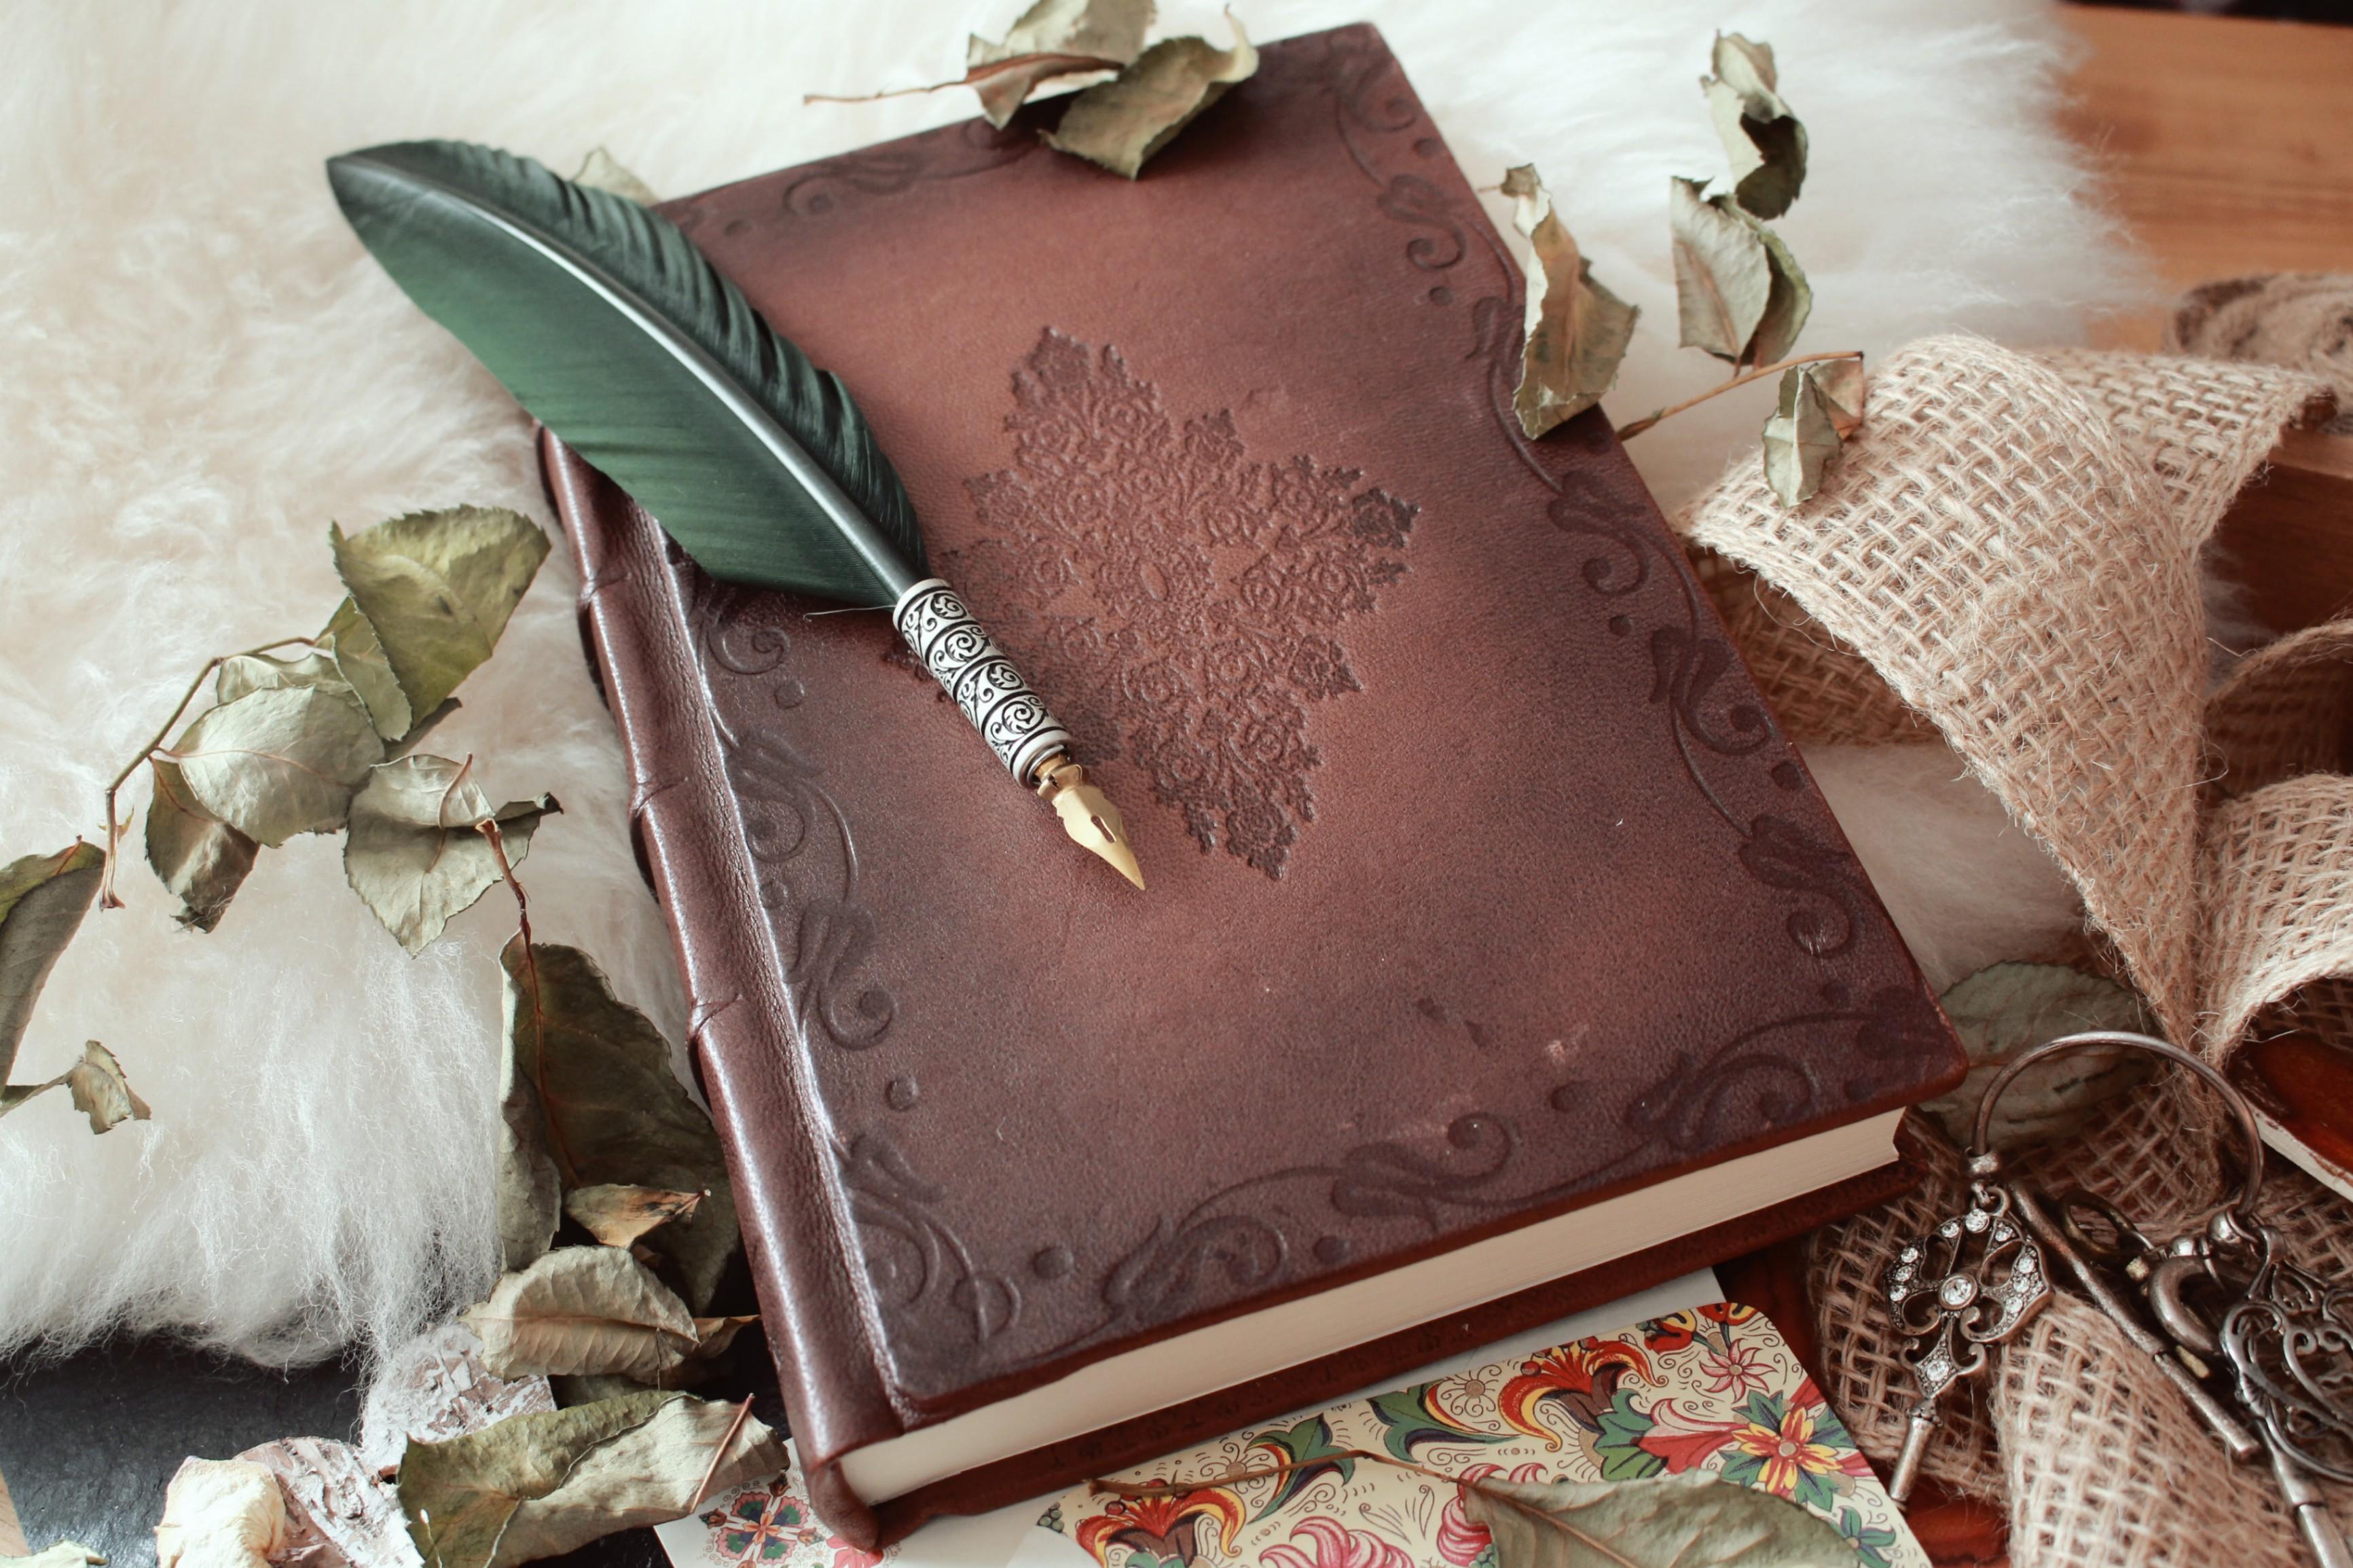 https://ru.freepik.com/free-photo/high-angle-shot-of-a-quill-pen-on-an-old-book-covered-with-dried-flower-petals_10303312.htm#&position=38&from_view=search&track=ais&uuid=60b56113-3cf1-4a5c-b67f-3cf9c9f0f870